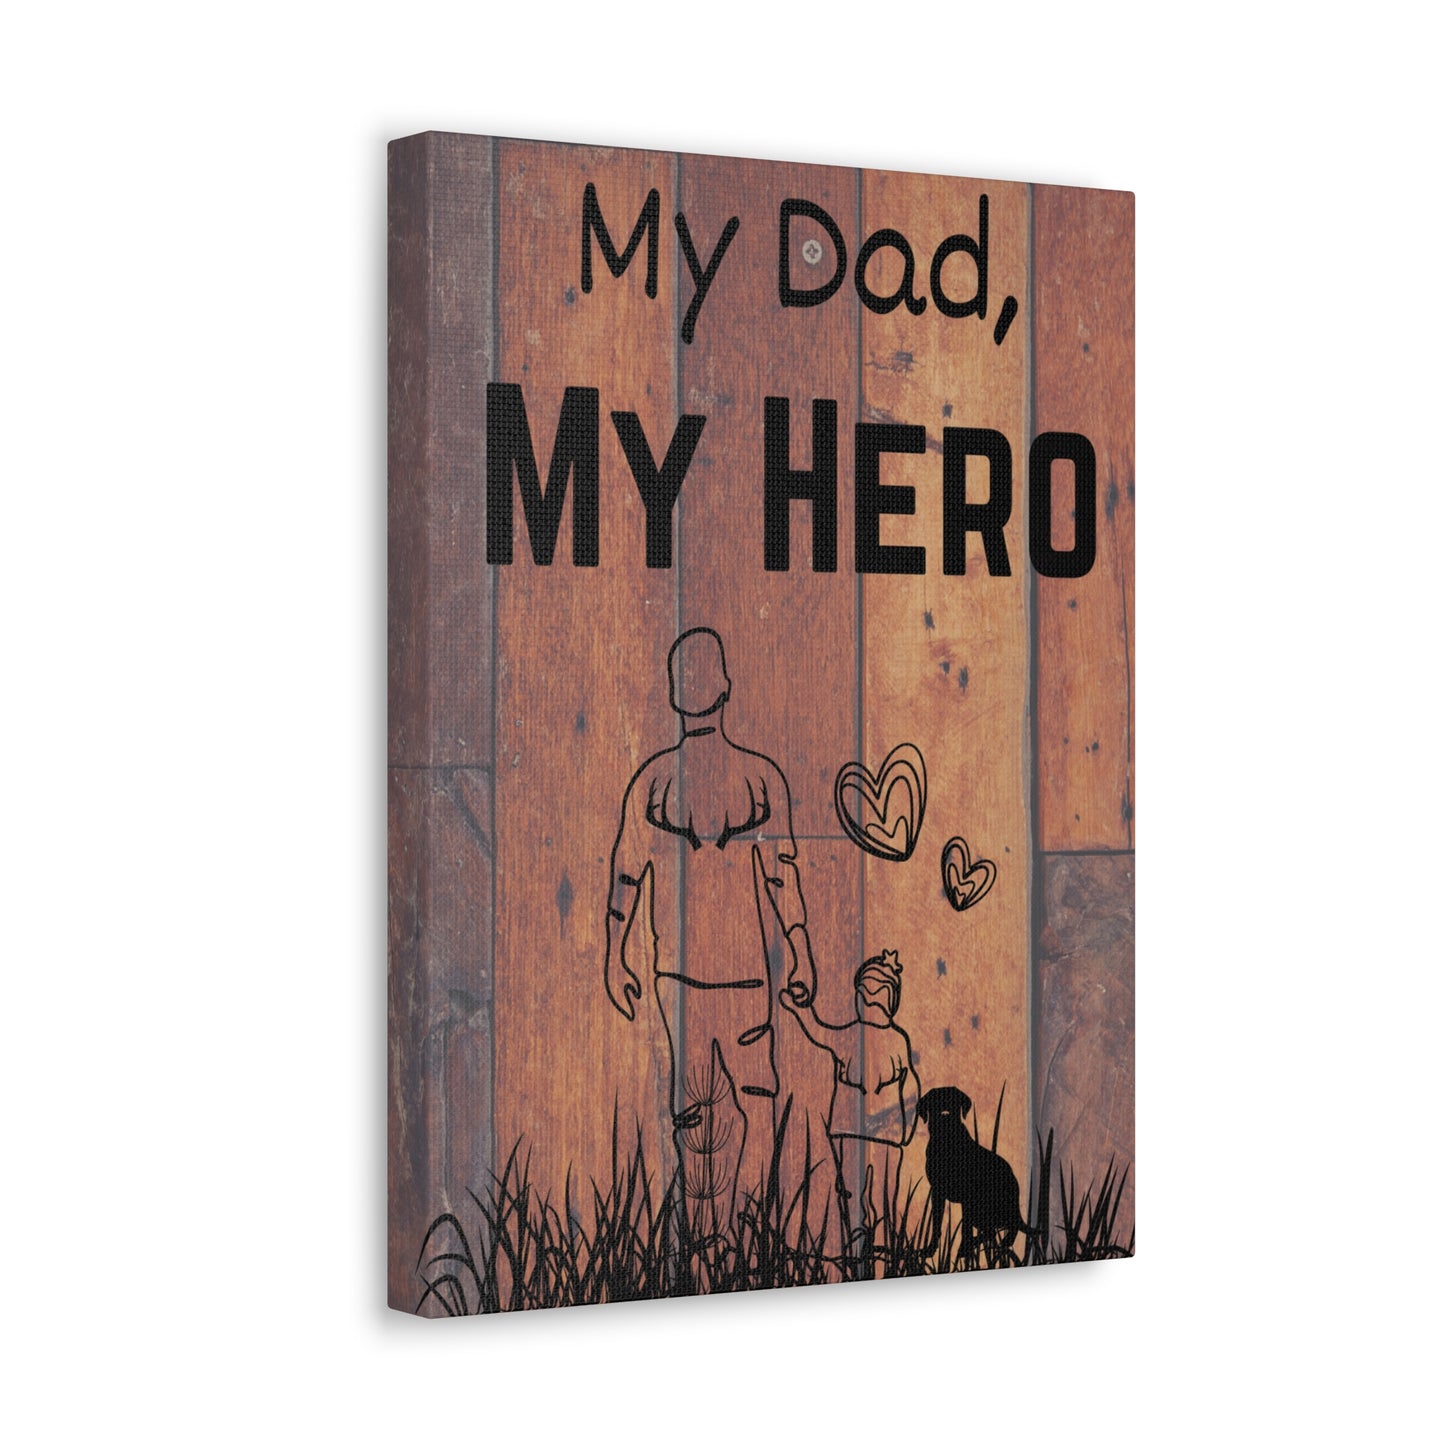 My Dad, My Hero Wall Decor with Dog, side view.